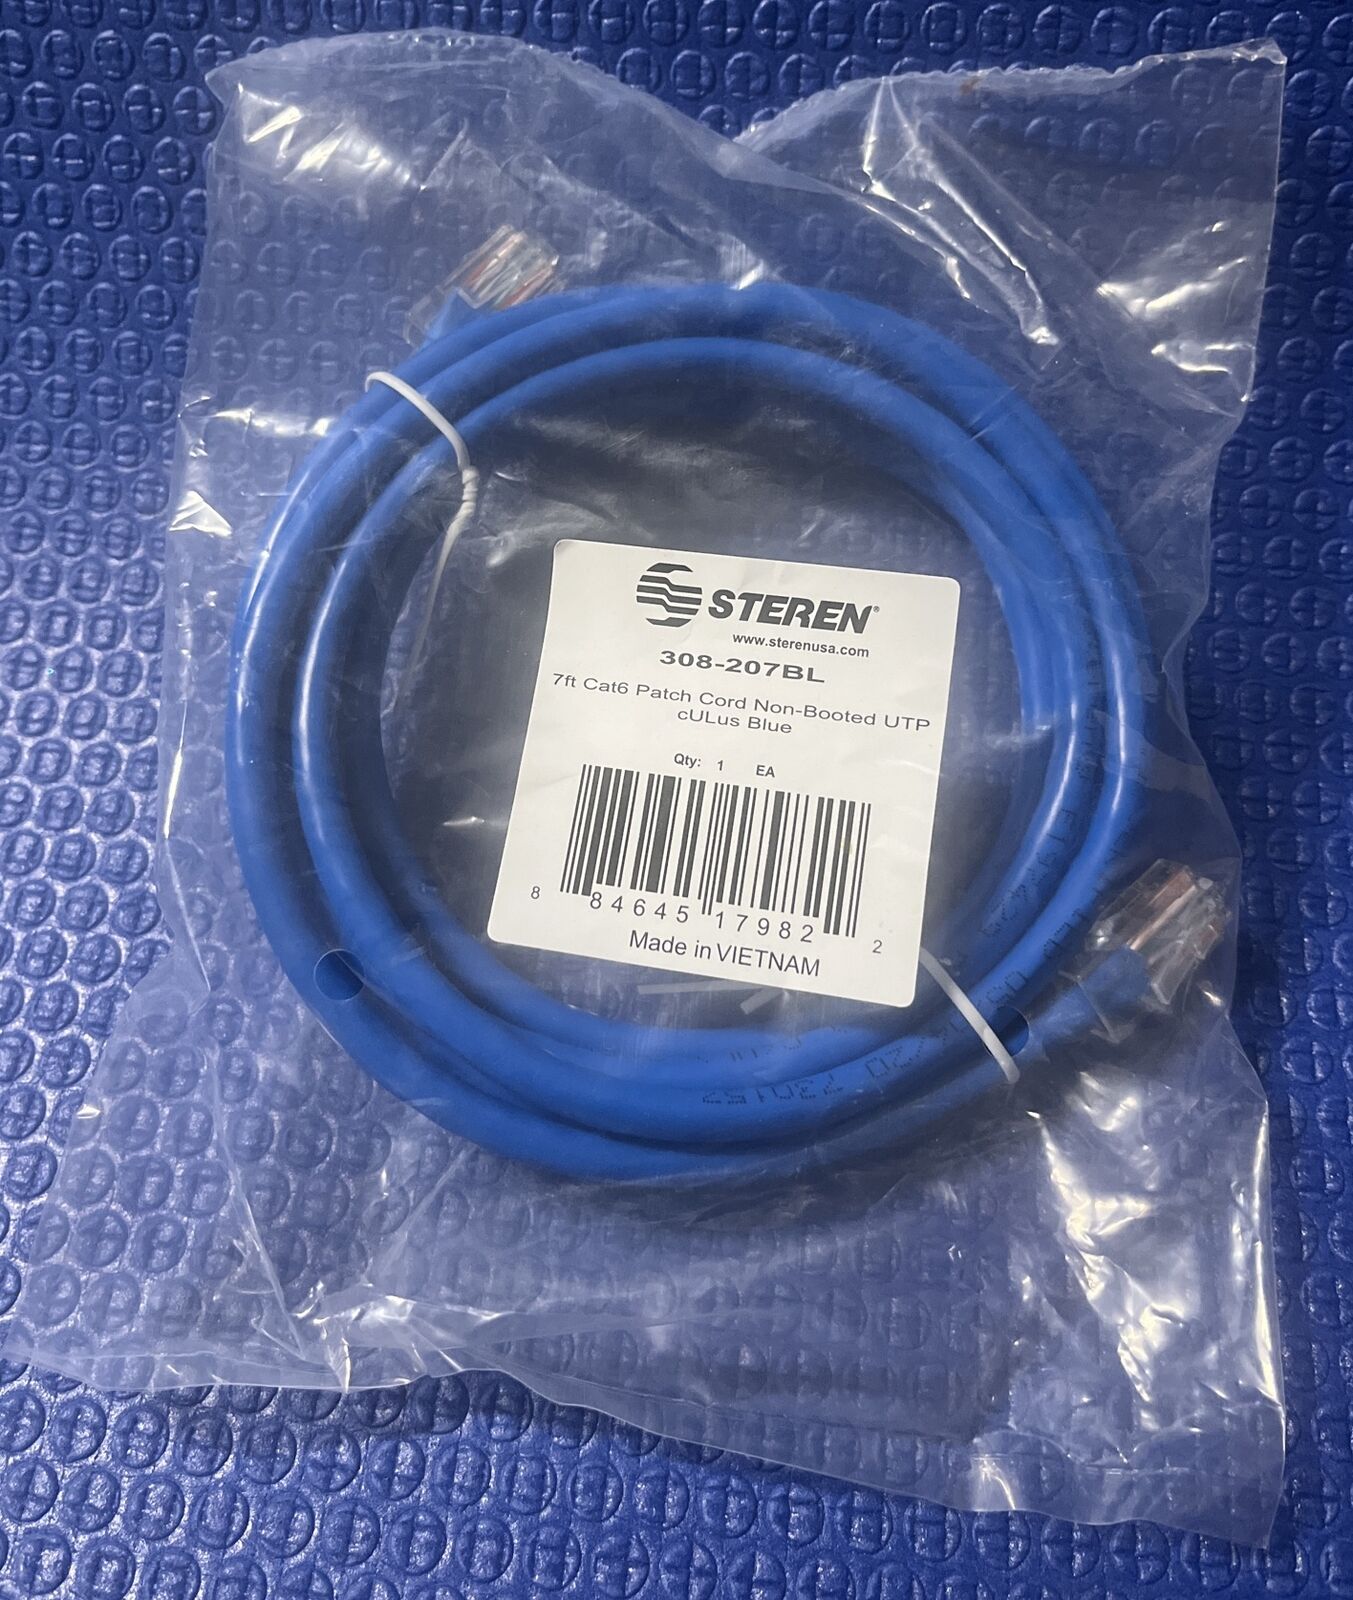 Steren 7ft Cat6 Patch Cord Non-Booted UTP cULus Blue